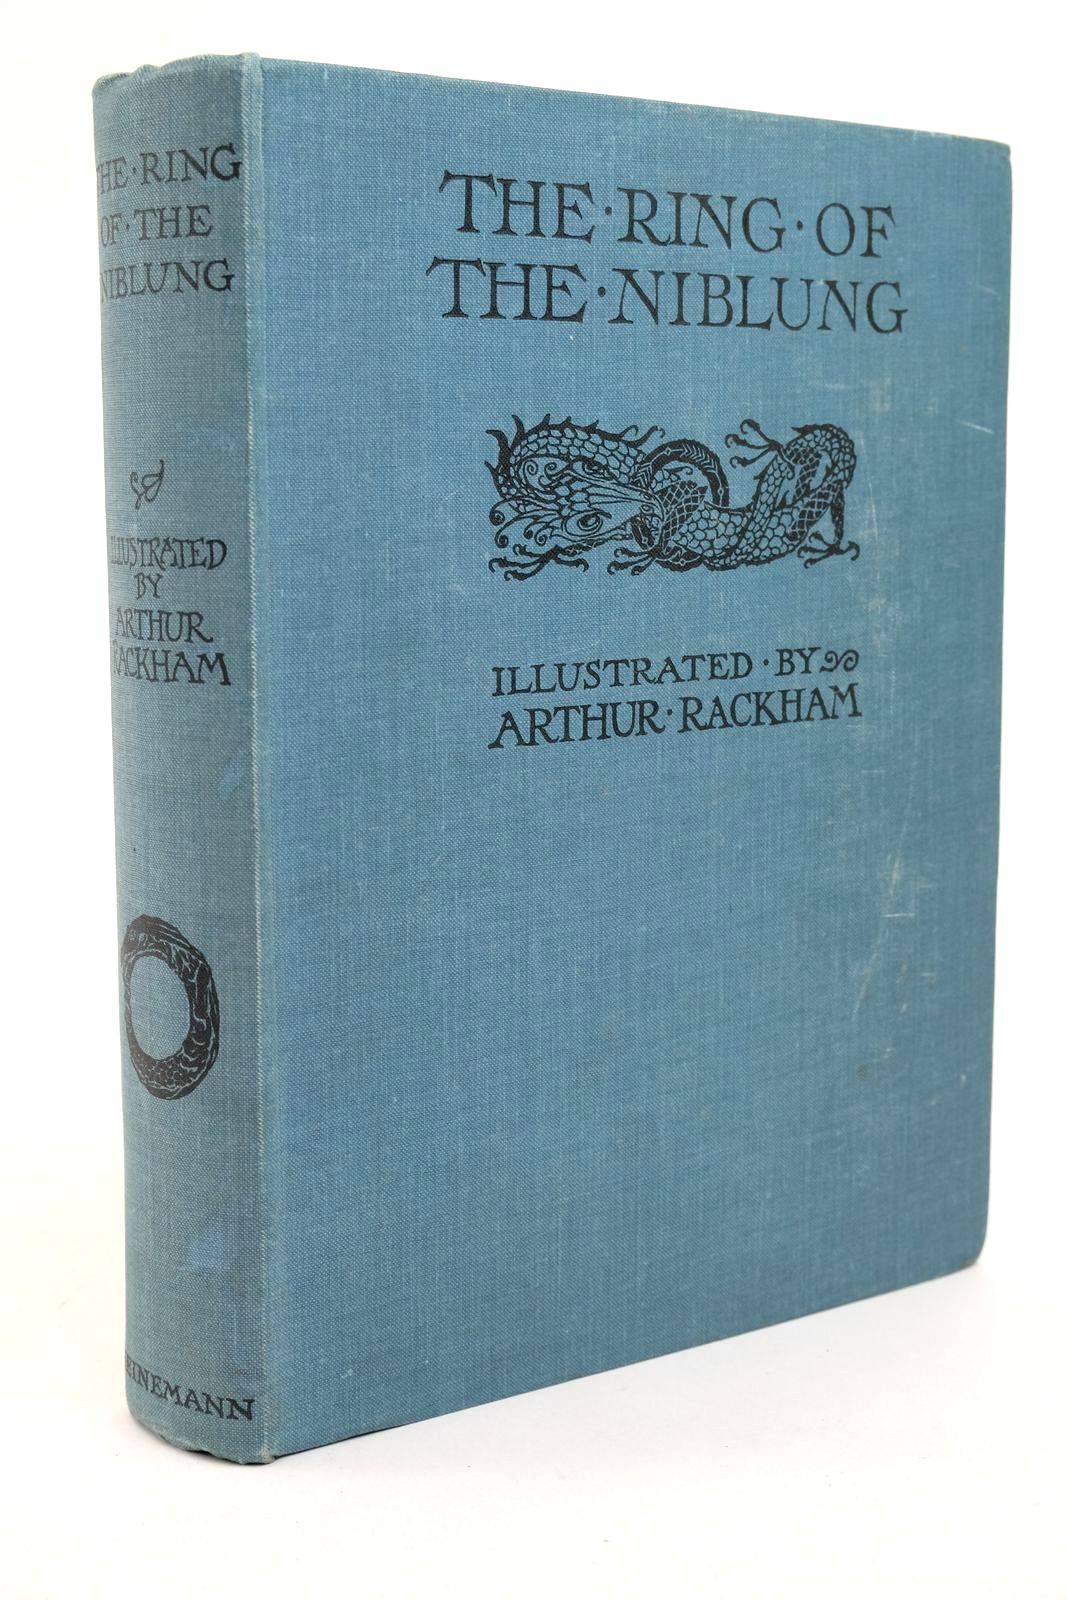 Photo of THE RING OF THE NIBLUNG written by Wagner, Richard illustrated by Rackham, Arthur published by William Heinemann Ltd. (STOCK CODE: 1323067)  for sale by Stella & Rose's Books